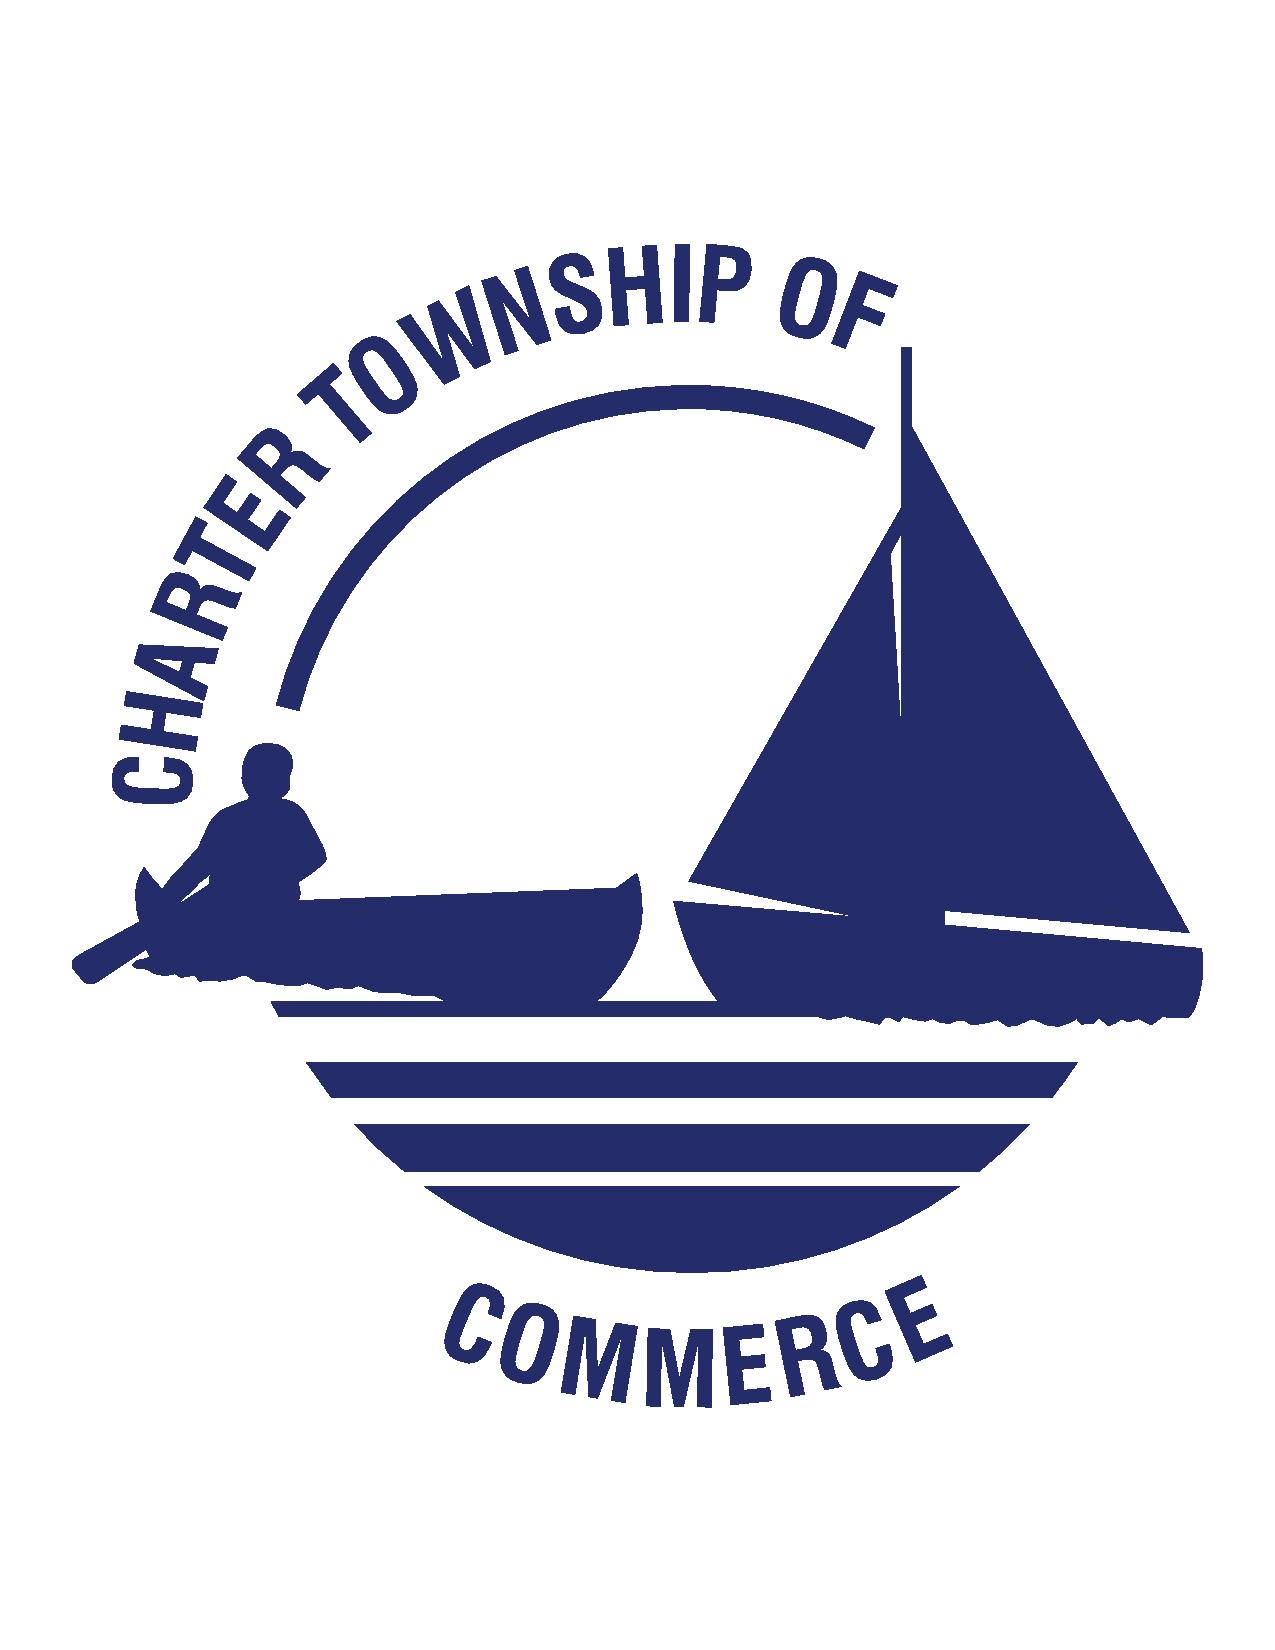 Organization logo of Charter Township of Commerce